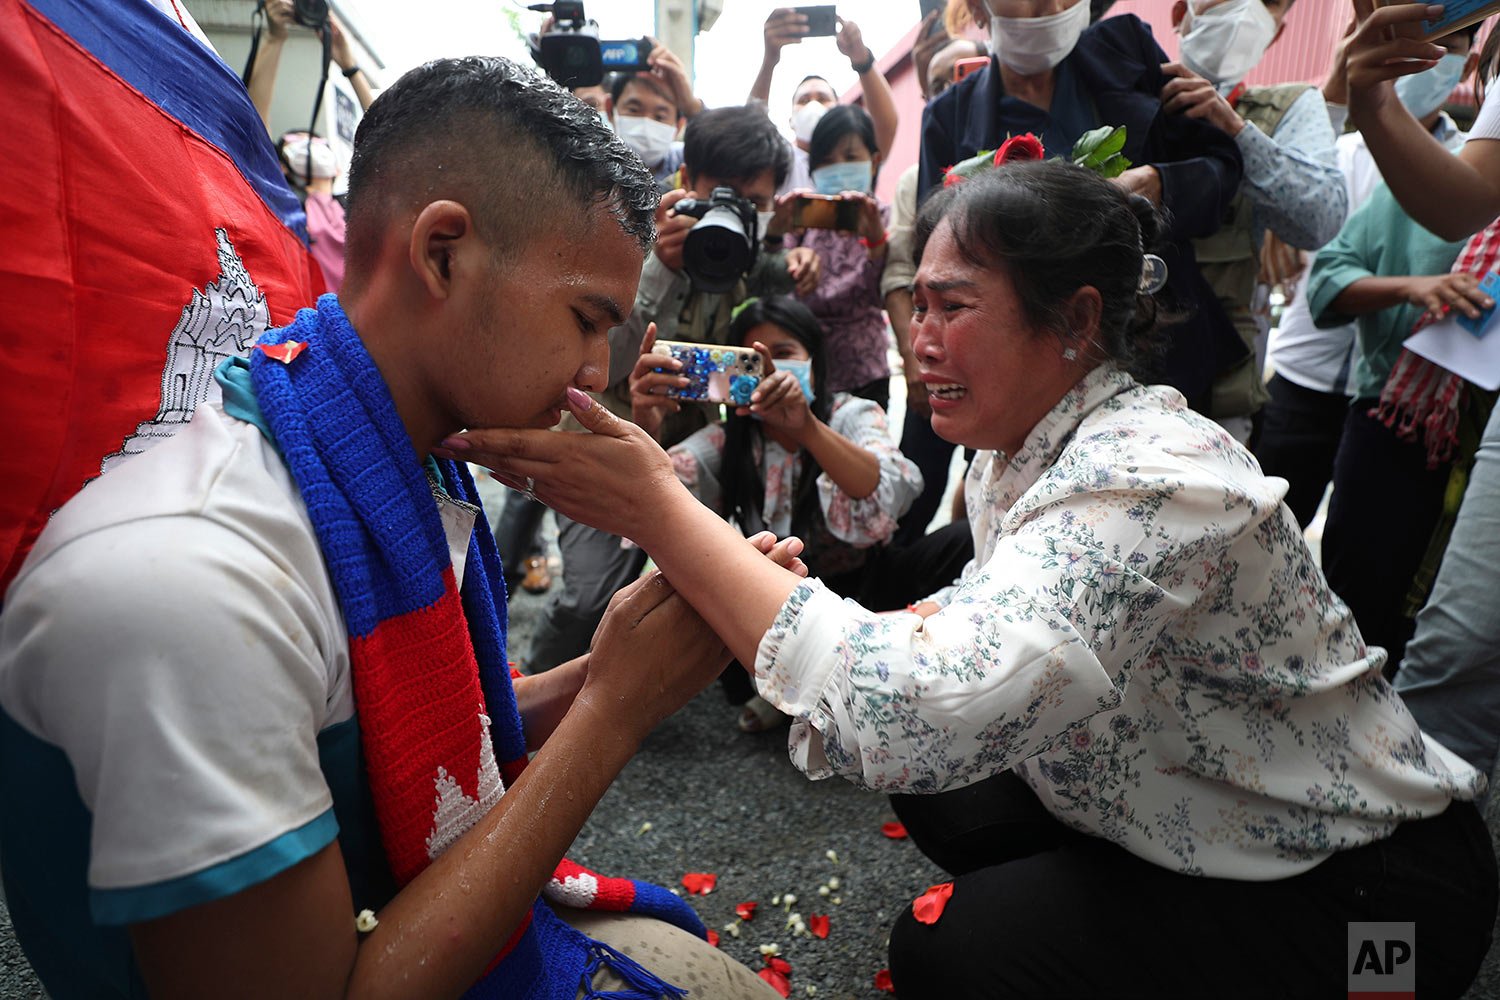  Prum Chantha, right, meets her son Kak Sovannchhay, 16, outside the main prison of Prey Sar after the autistic teenager was released after serving time for posting comments critical of the government on social media, in a case that has attracted glo